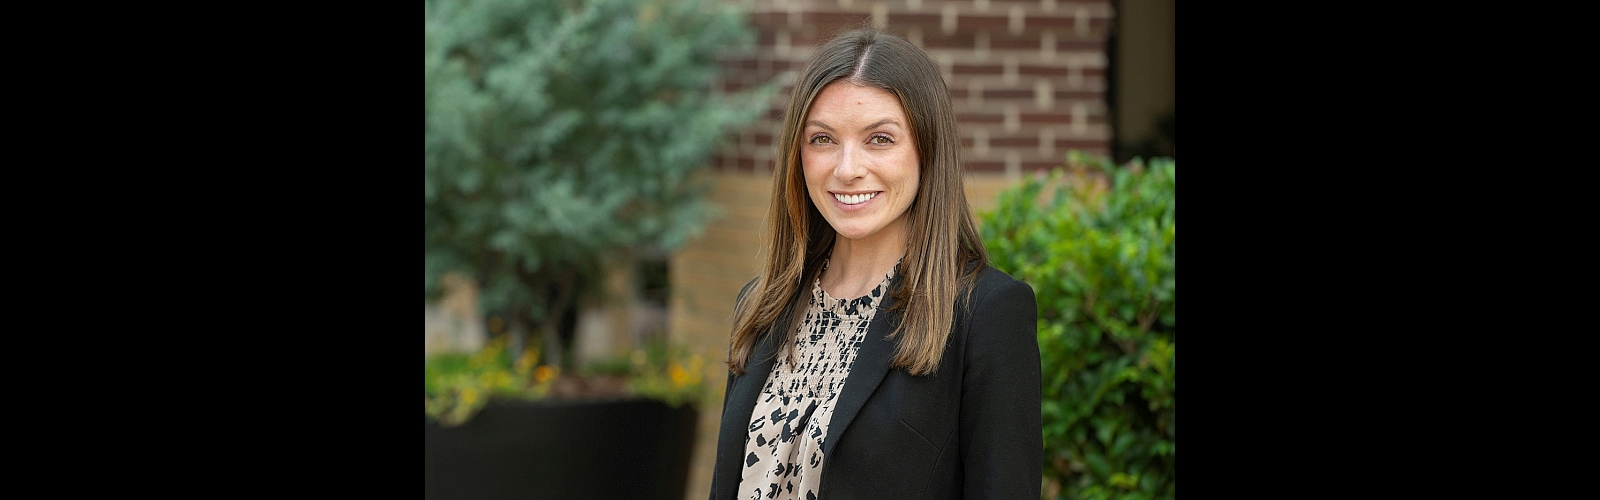 wjcb welcomes Mackenzie Catanzaro to liability litigation practice in the Greenville Office